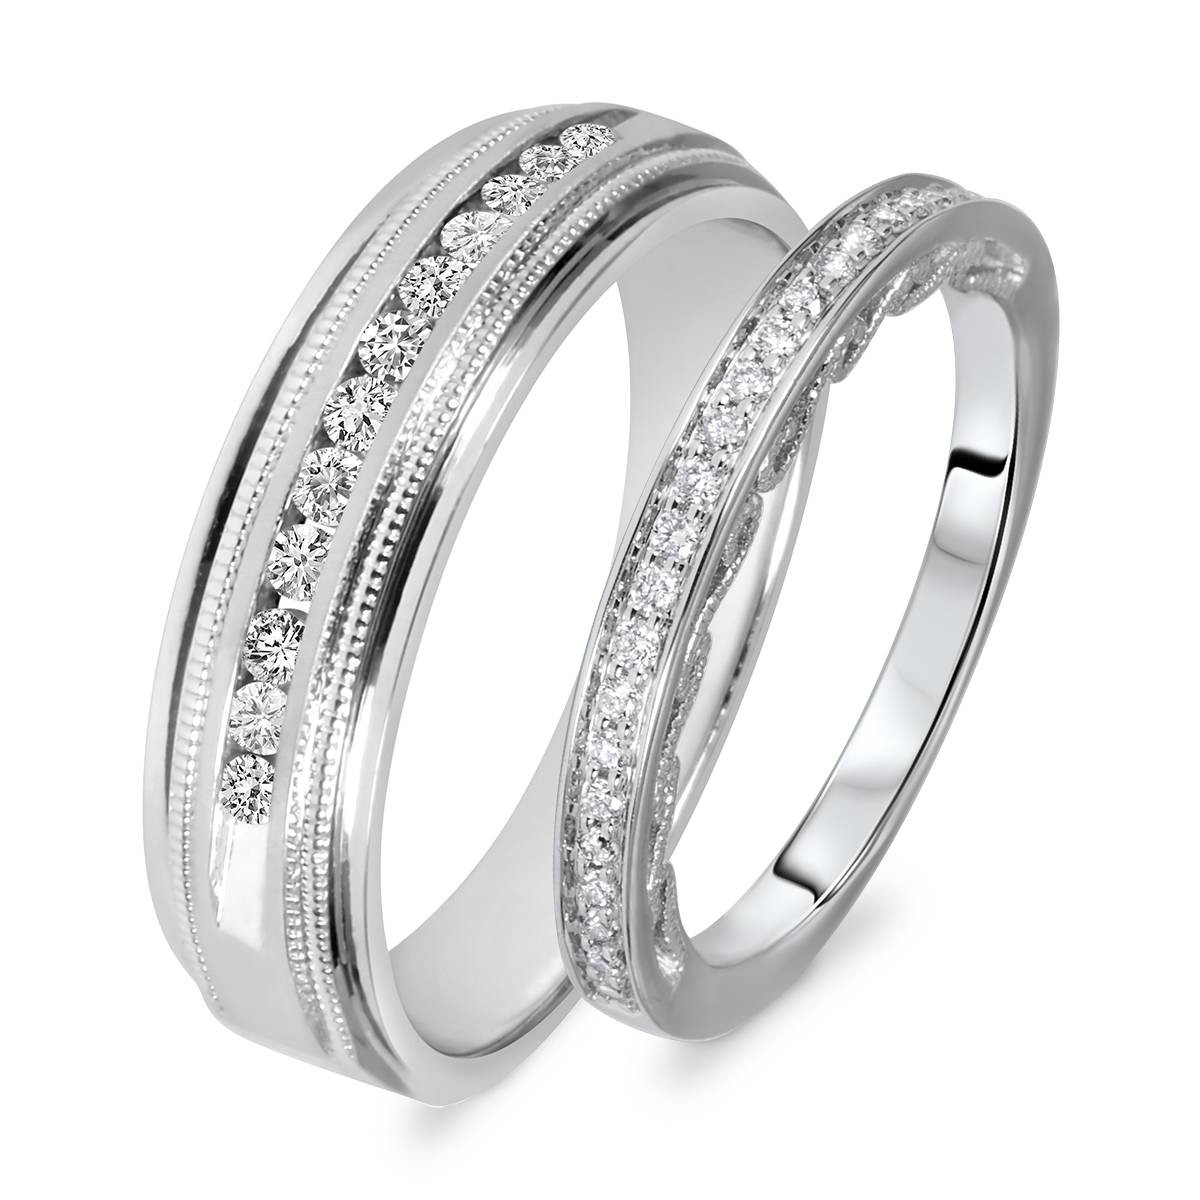 His And Her Wedding Bands Sets Cheap
 15 Inspirations of Cheap Wedding Bands Sets His And Hers